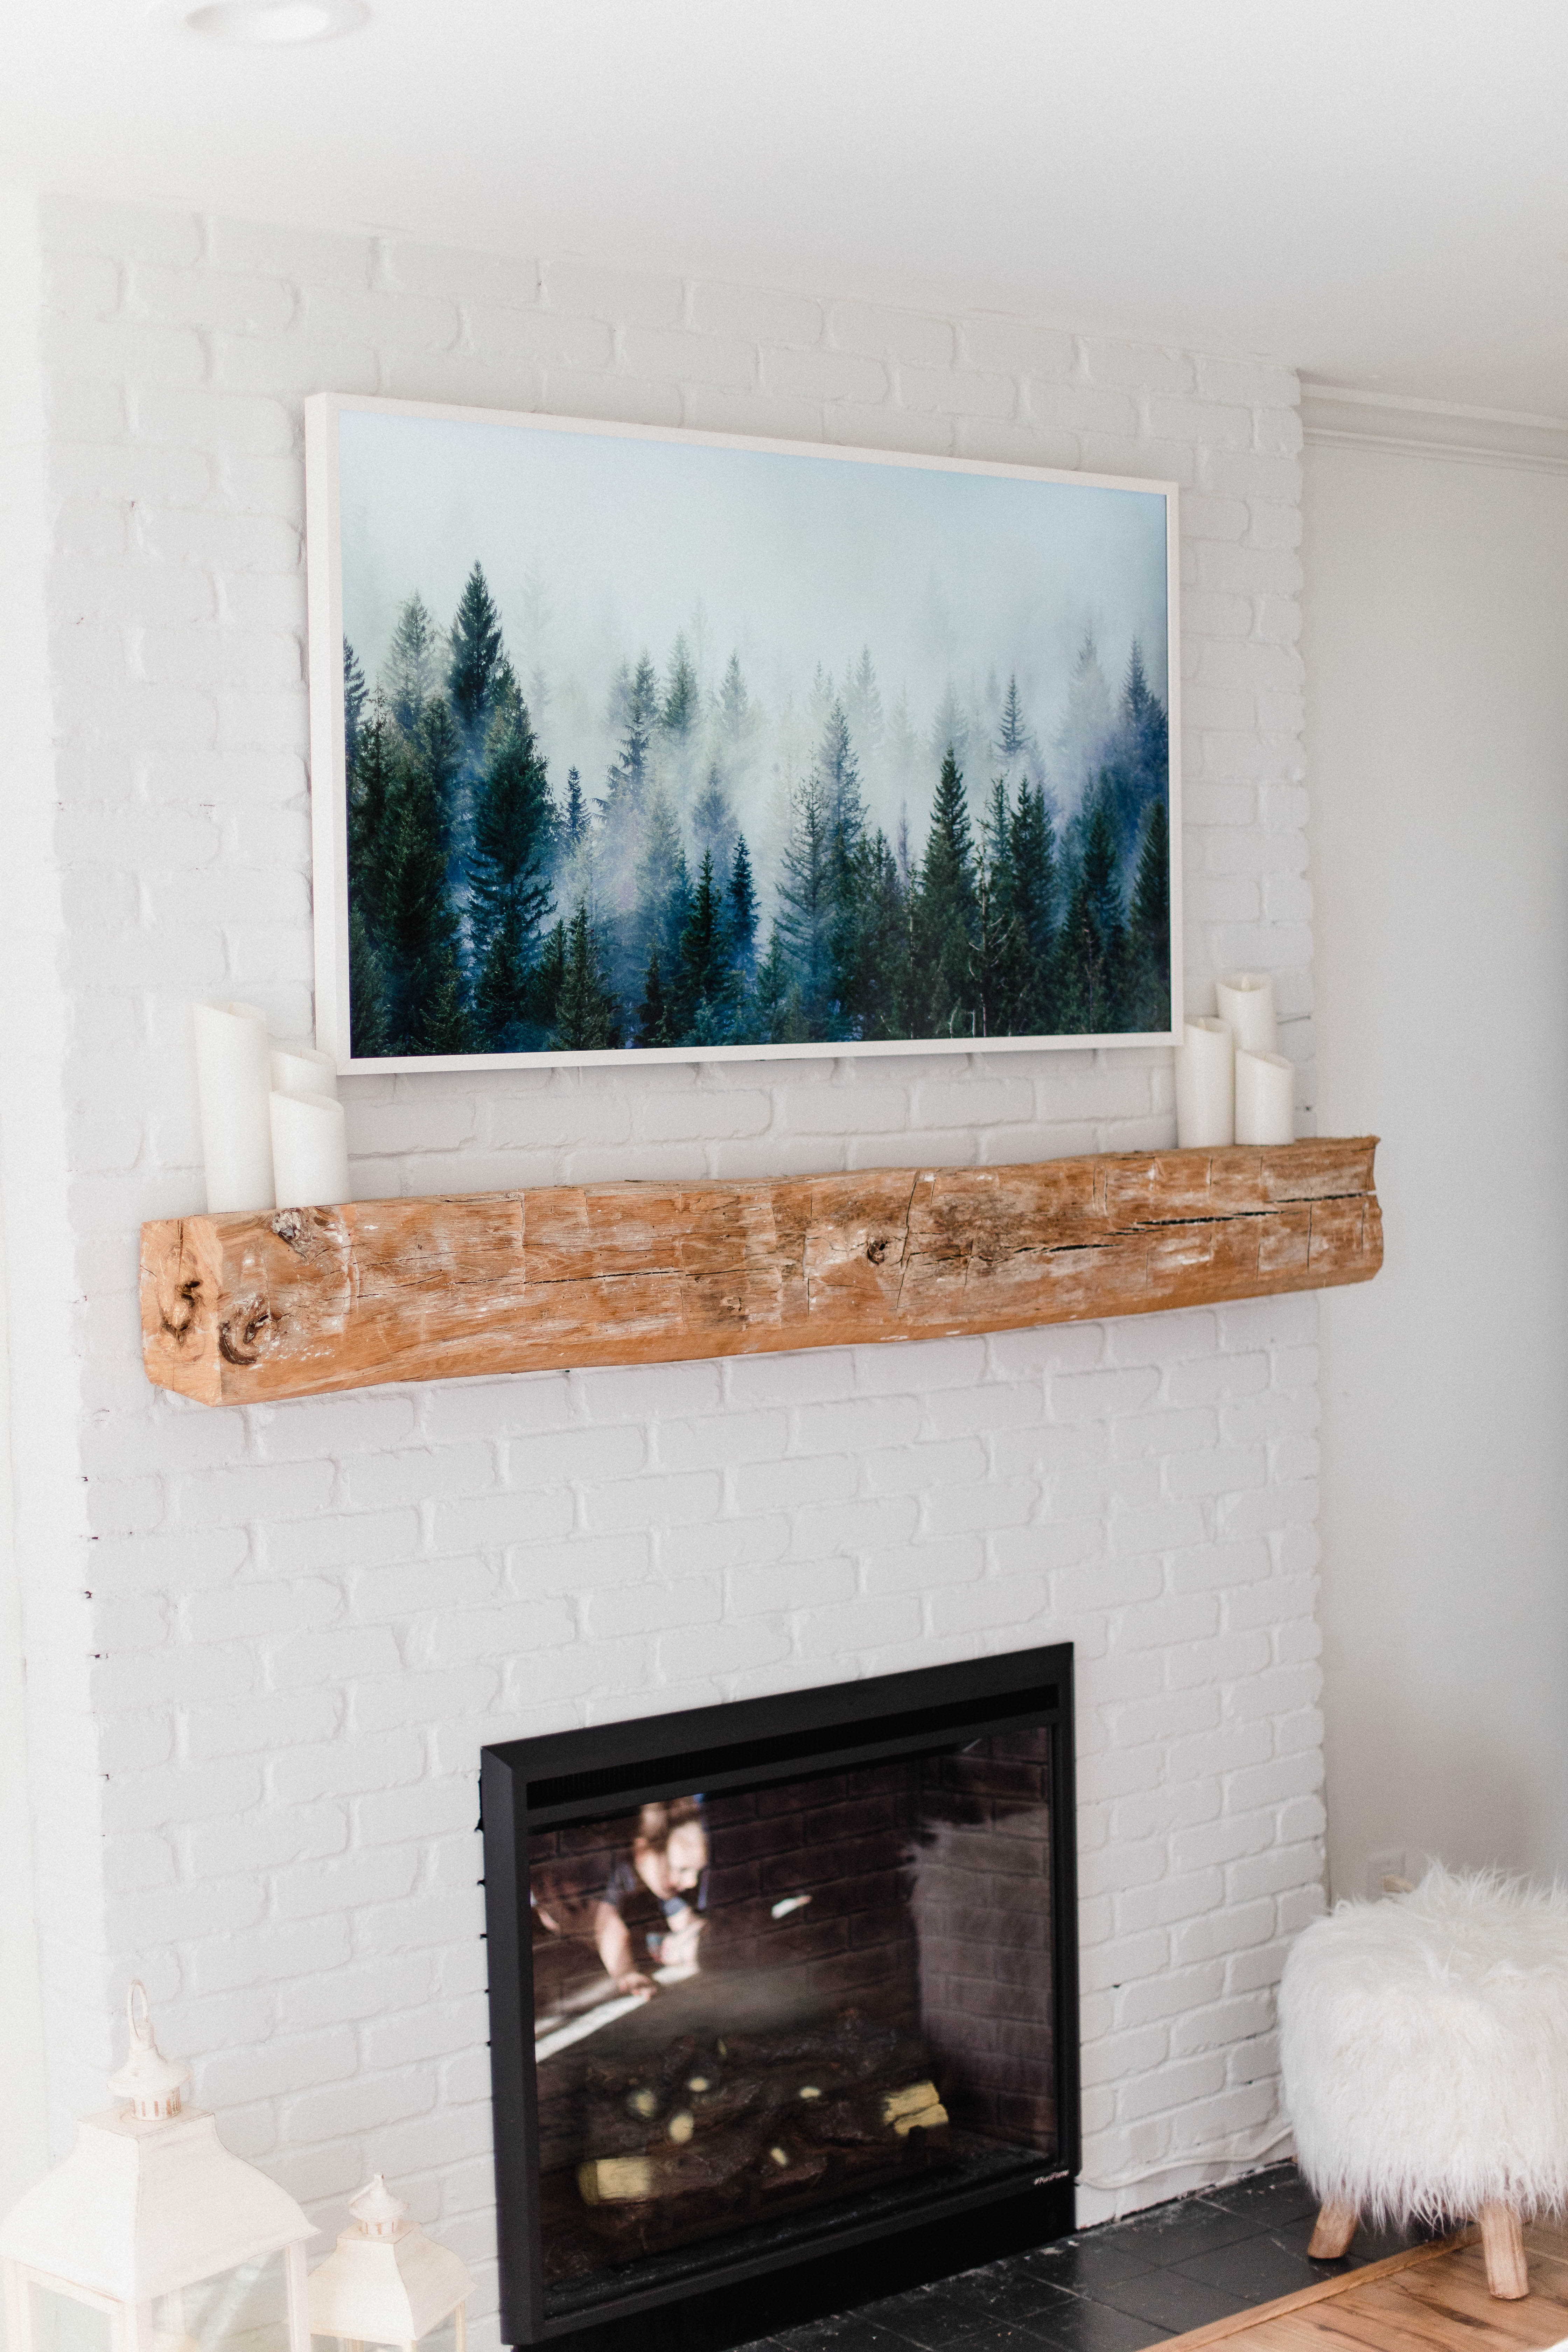 Connecticut life and style blogger Lauren McBride shares how to make the Samsung Frame TV look like art, including sizing and image tips and tricks.